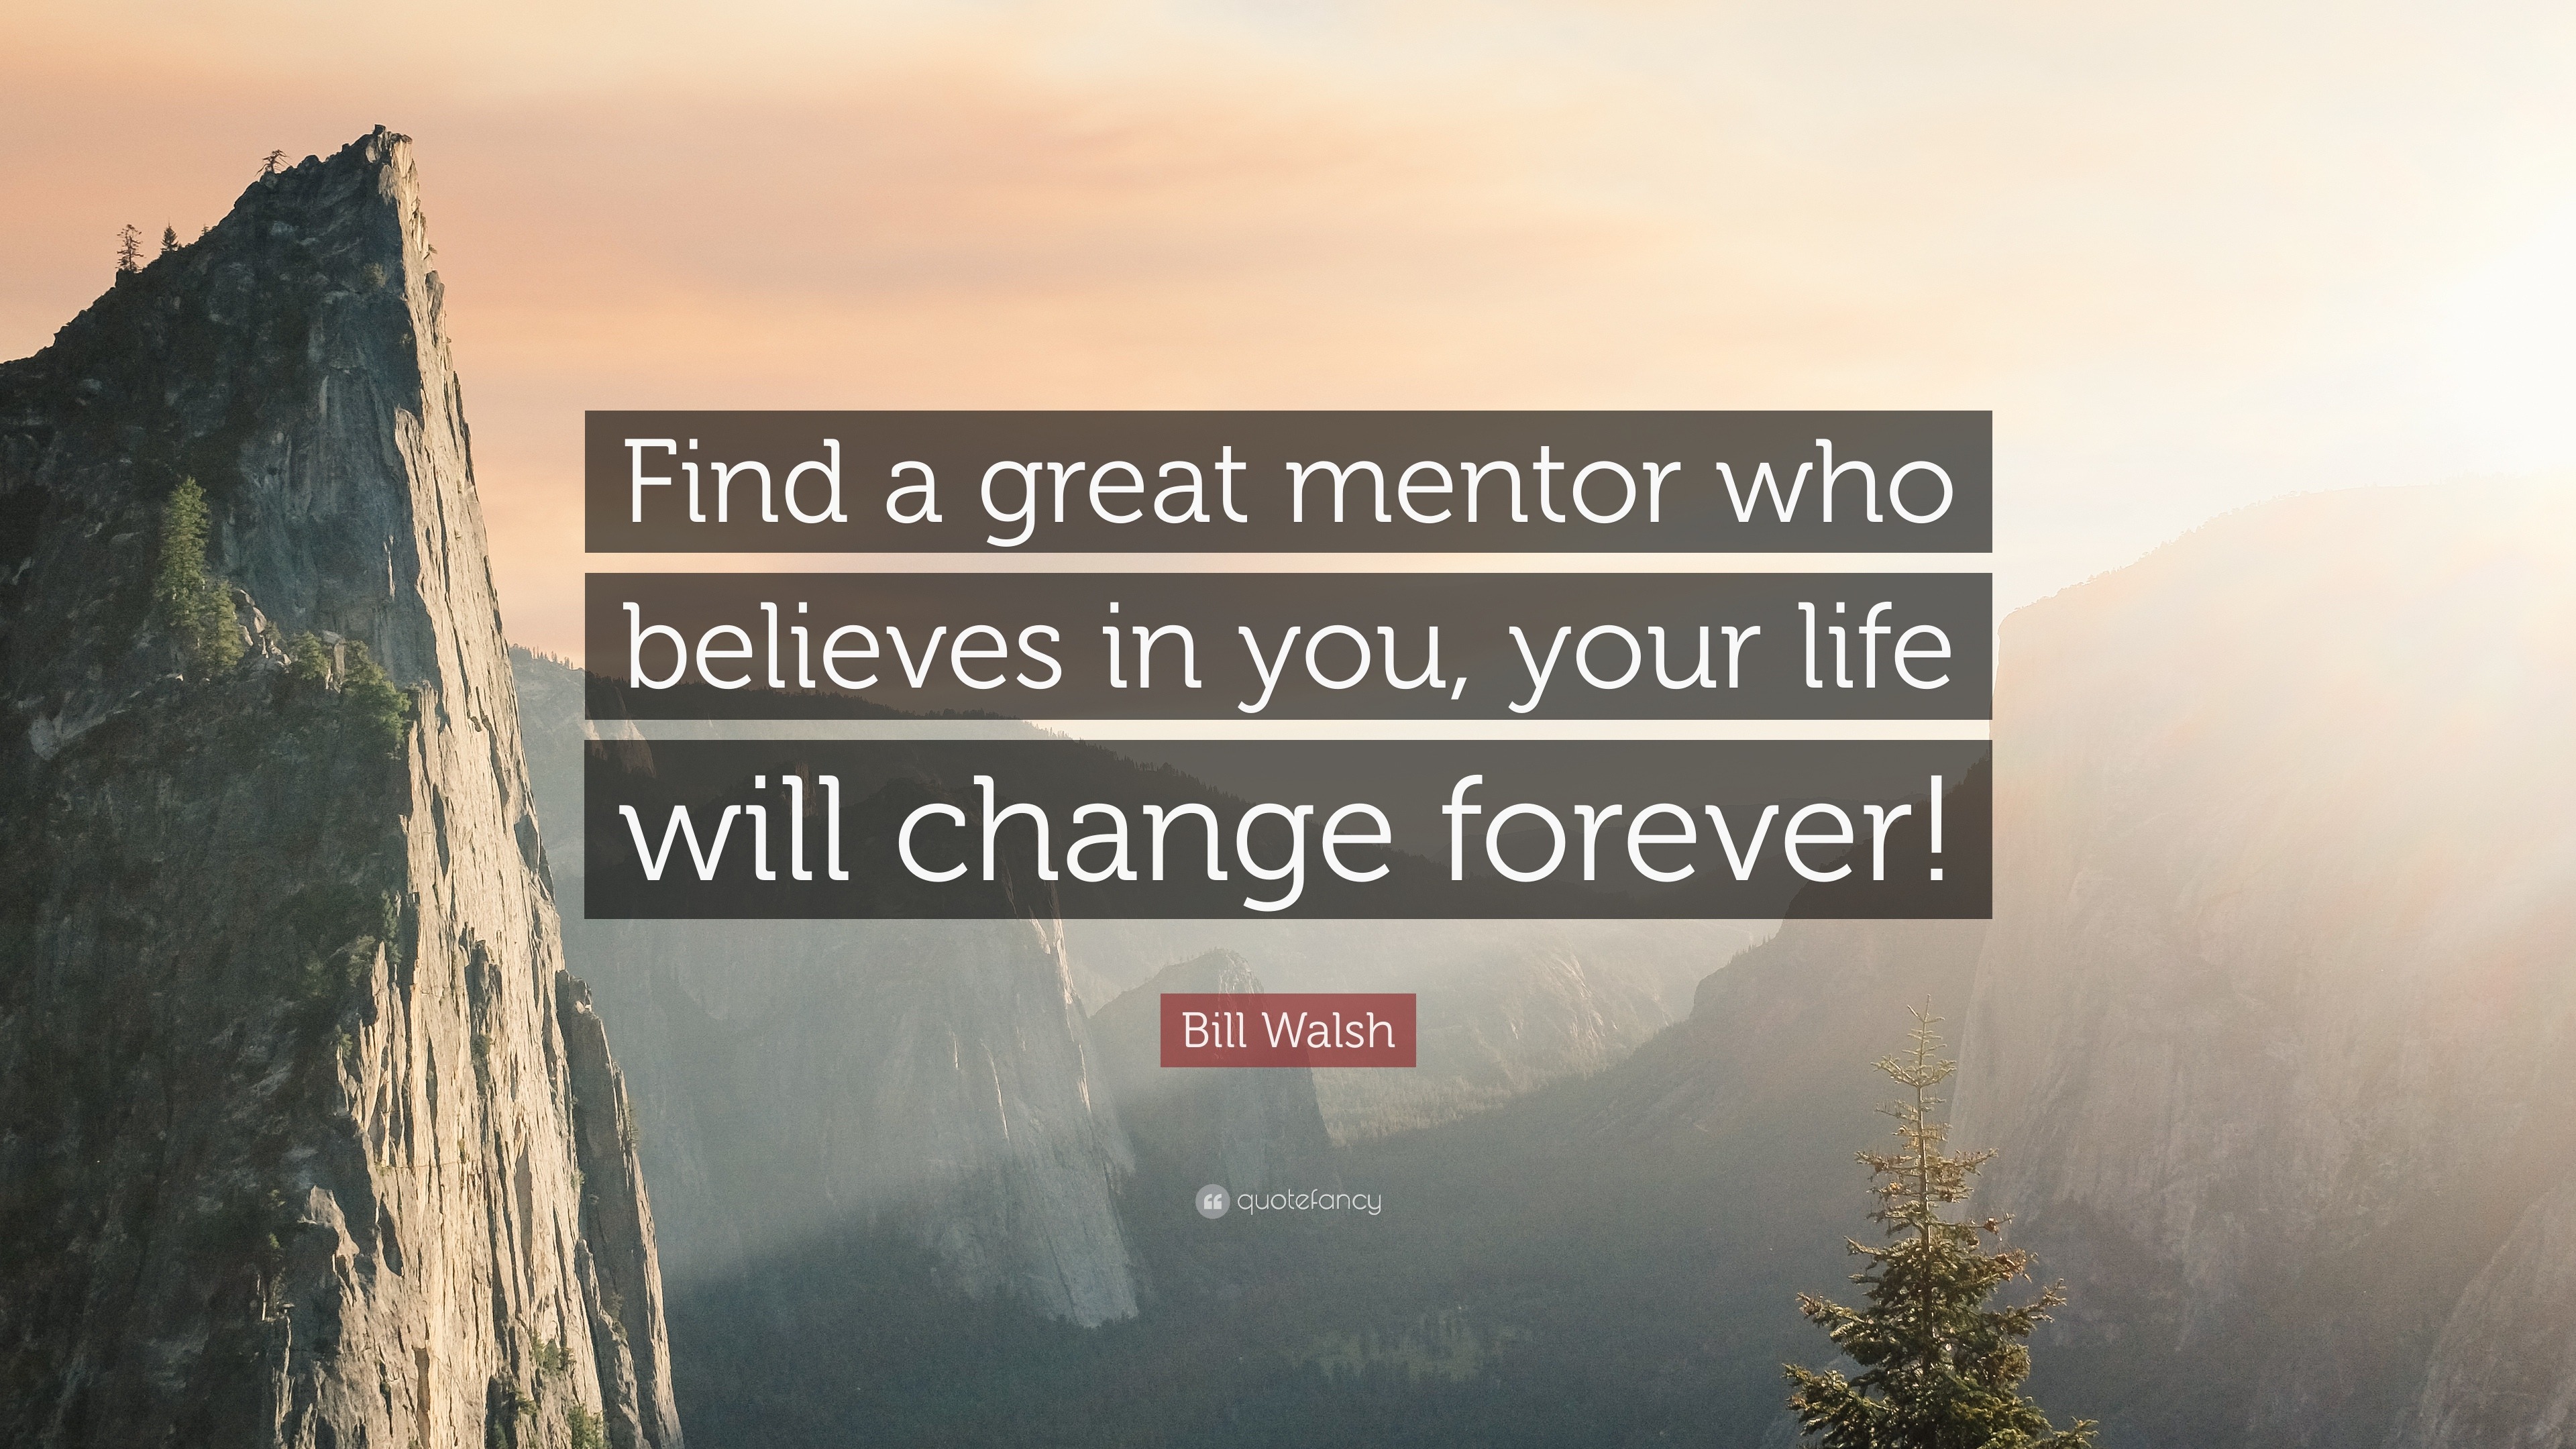 Prædiken Vil ikke gødning Bill Walsh Quote: “Find a great mentor who believes in you, your life will  change forever!”